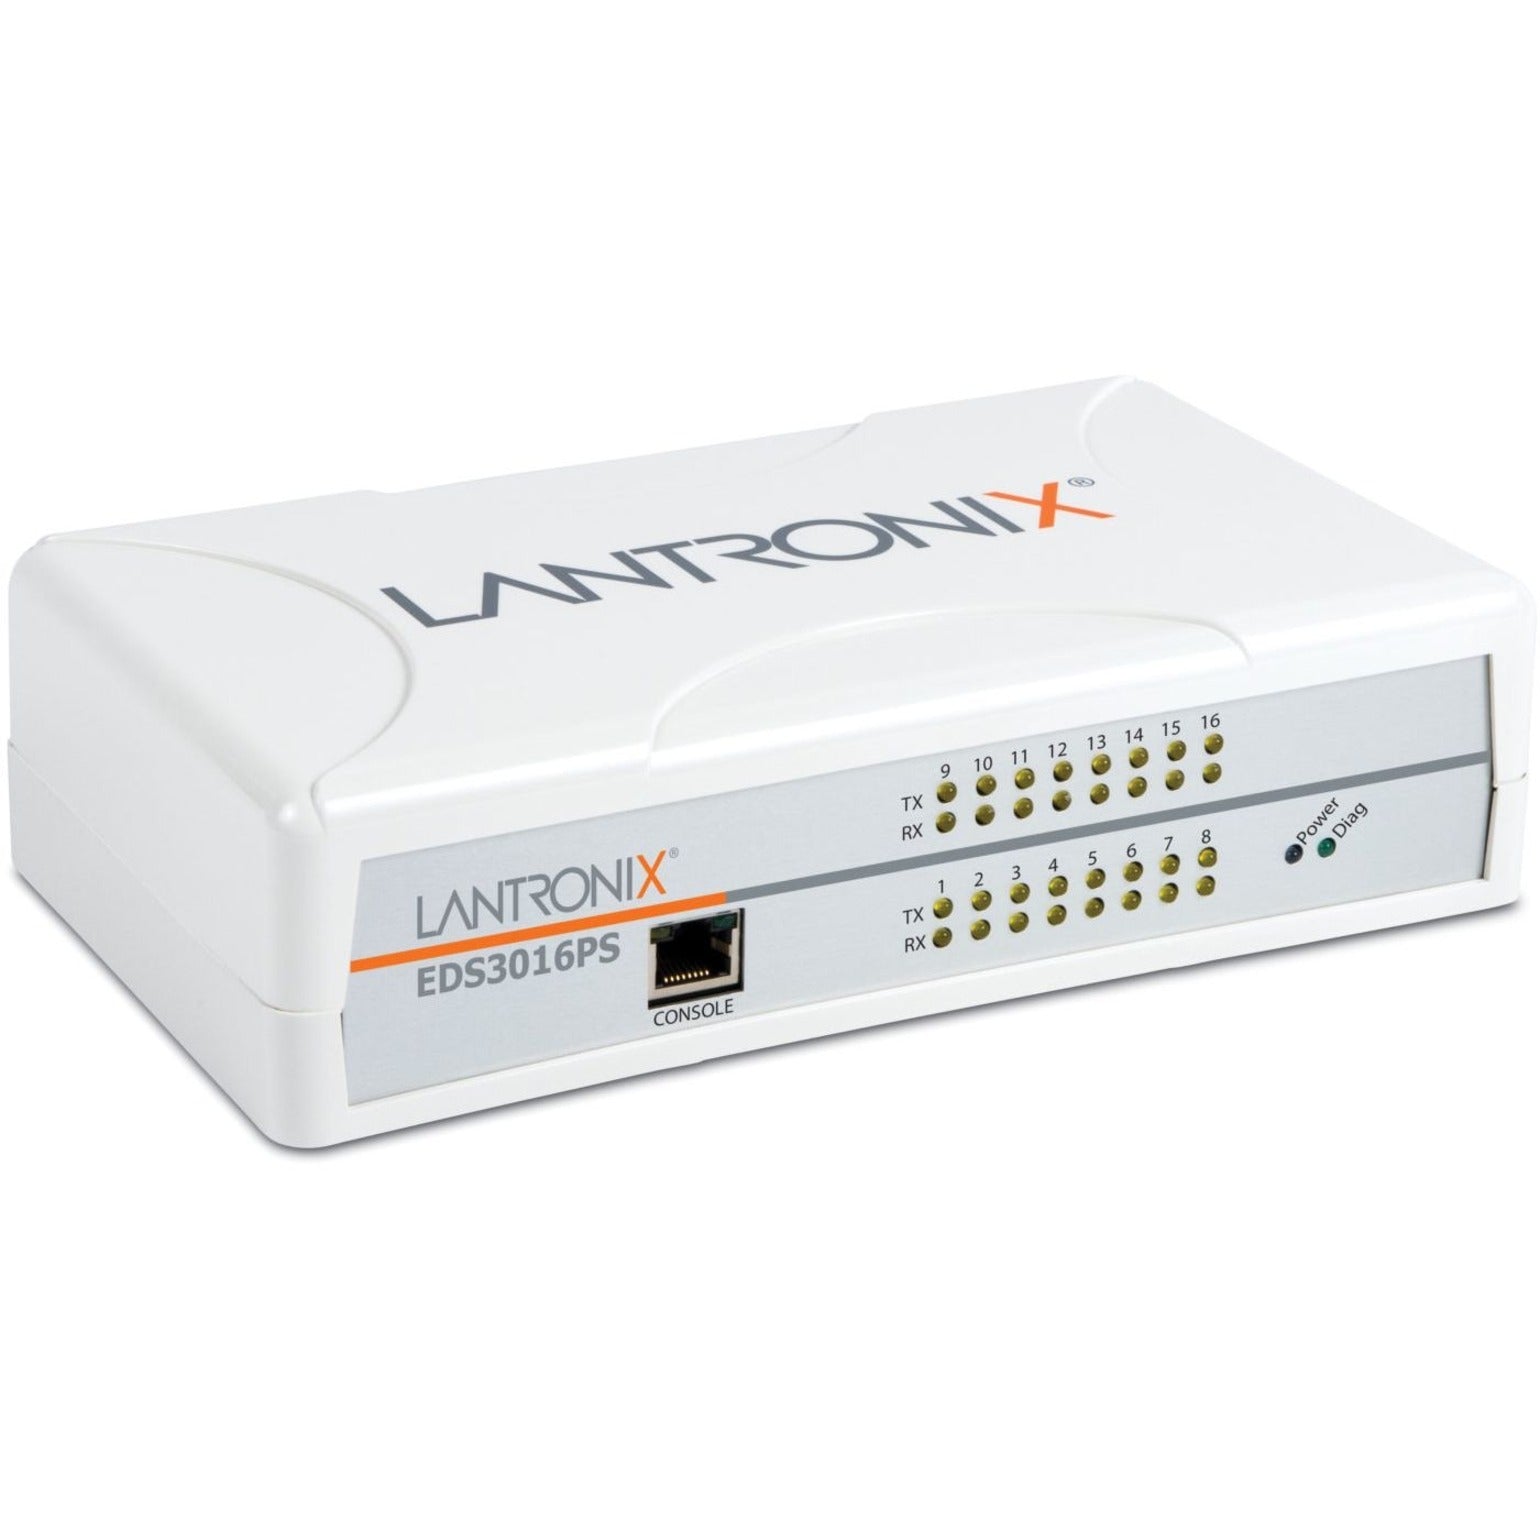 Lantronix EDS3016PS1NS EDS EDS3016PS Device Server, 16 Serial Ports, Gigabit Ethernet, 512MB Memory, 2 Year Warranty